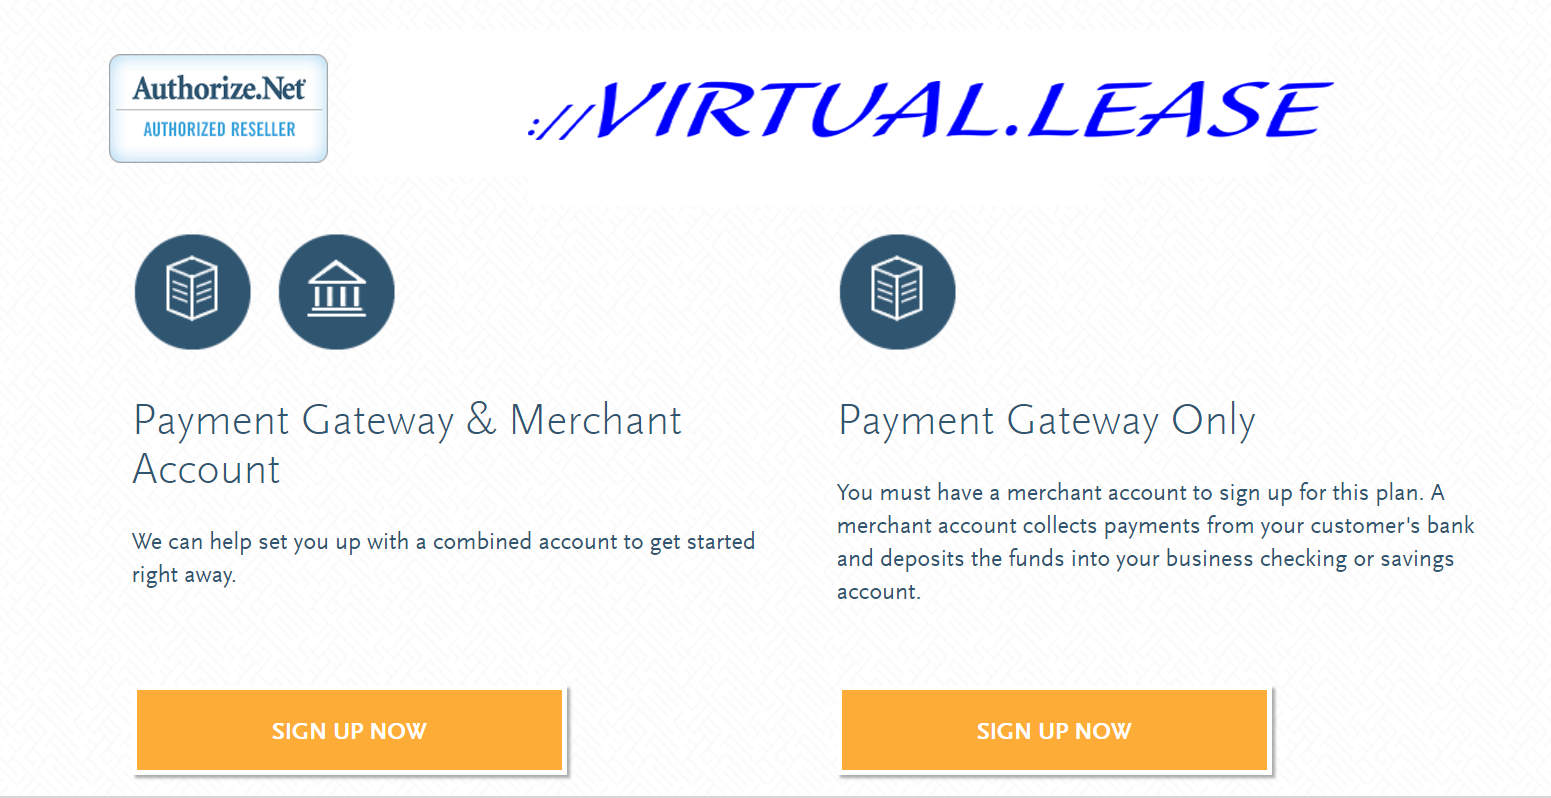 Virtual.Lease Payment Gateway and Merchant accounts